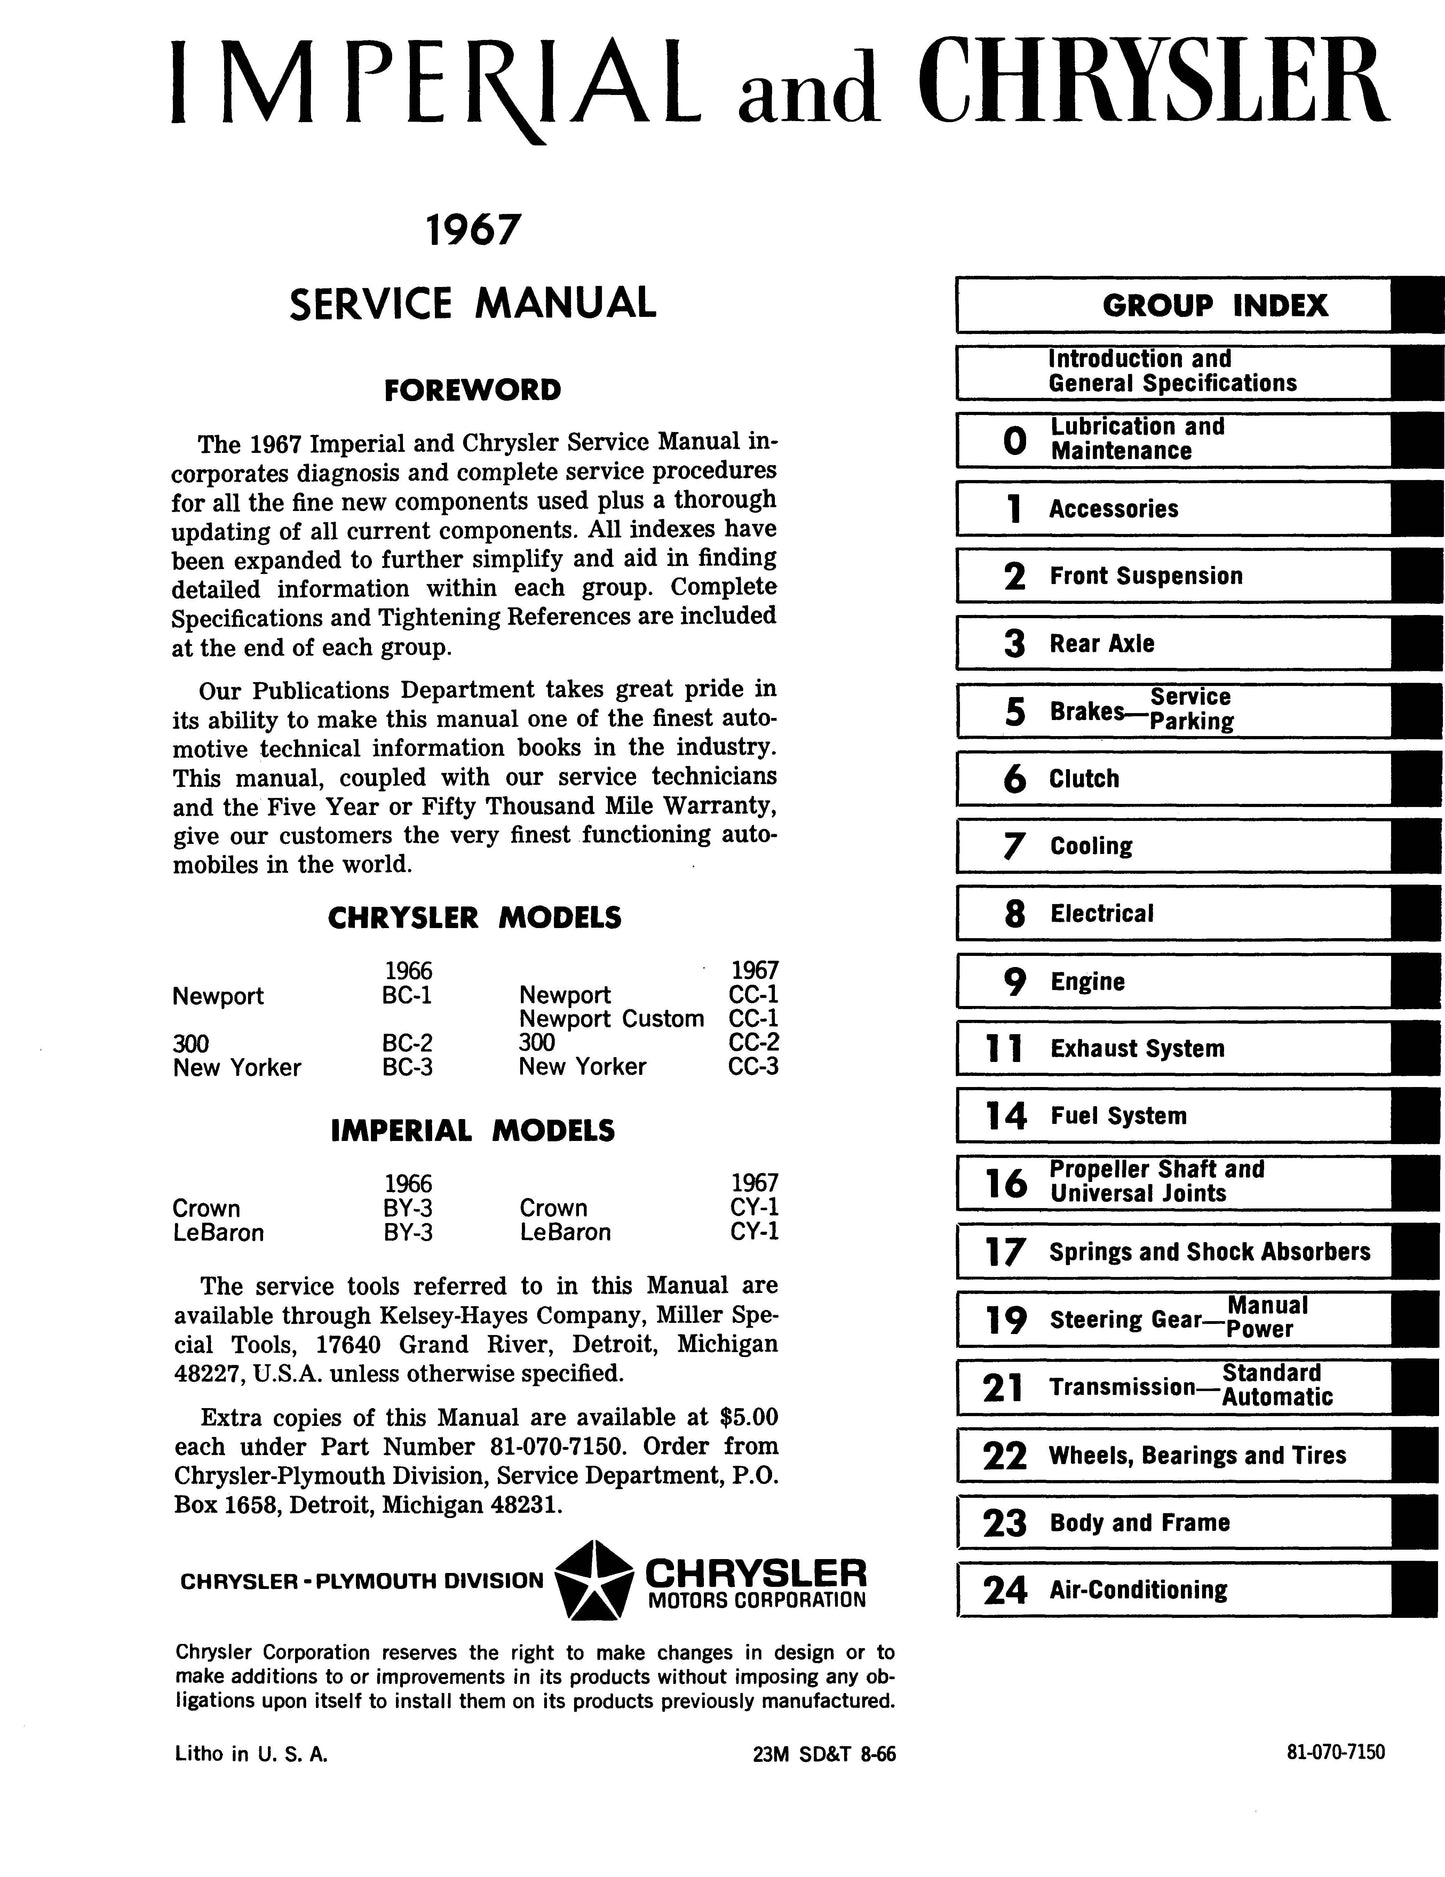 1967 Chrysler And Imperial Shop Manual All Models